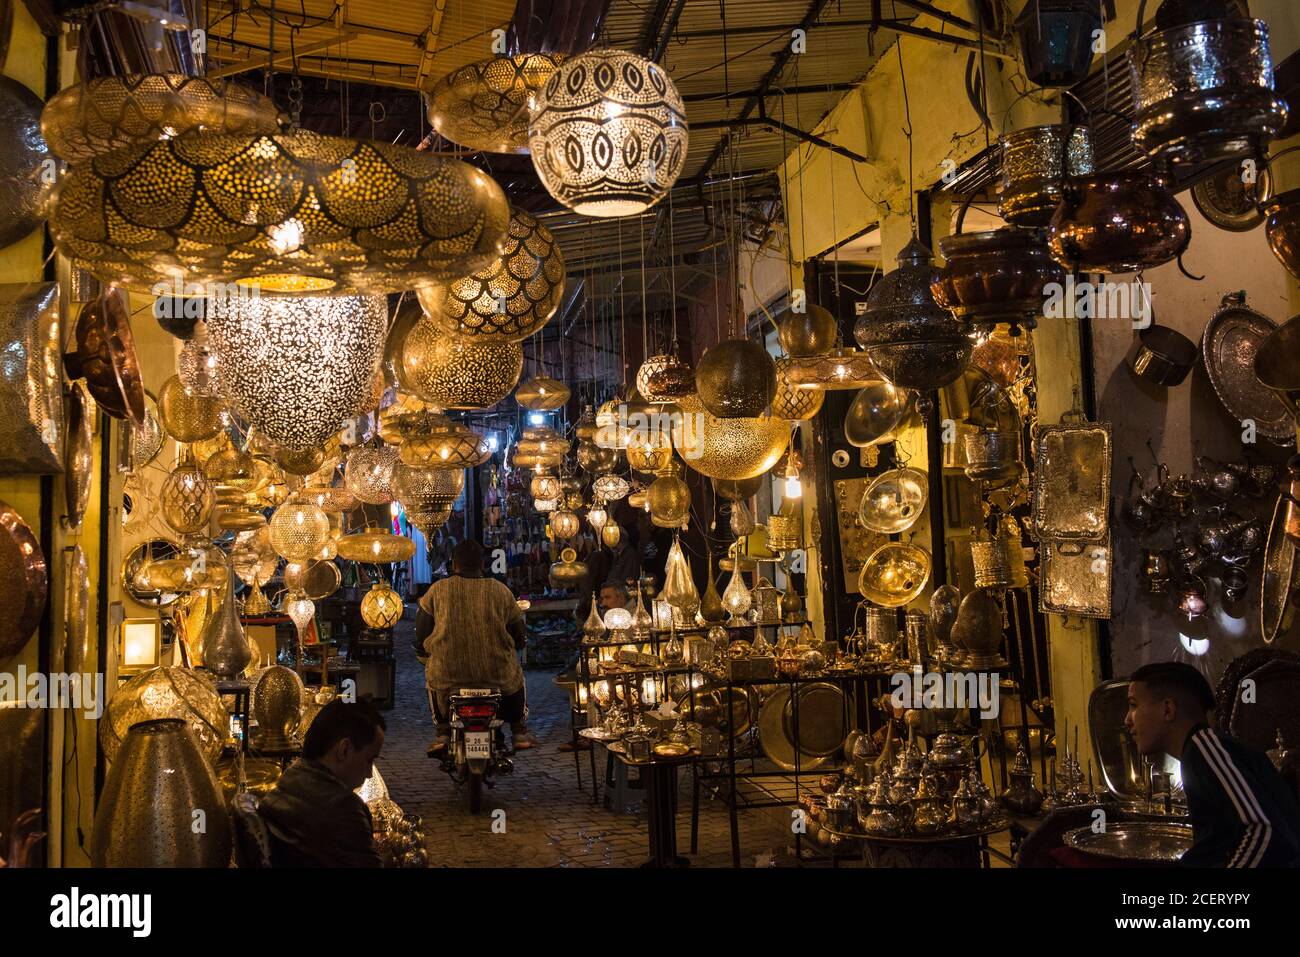 A motorbike rider passes between stalls selling Moroccan lampshades and ceiling lights  in the souk inside the Medina, Marrakesh Stock Photo